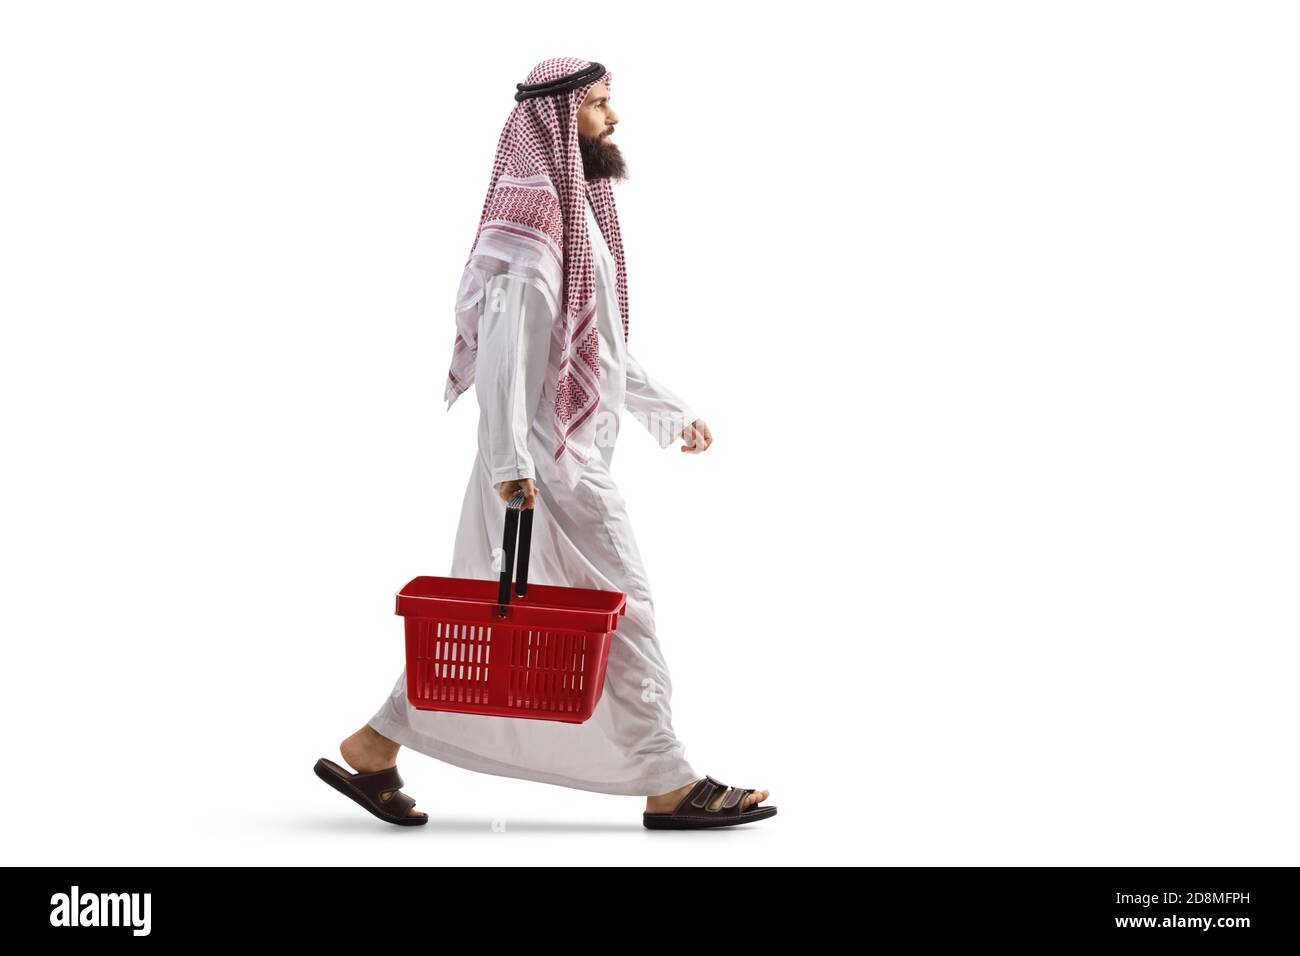 Full length profile shot of an arab man in a thobe walking with a shopping basket isolated on white background Stock Photo